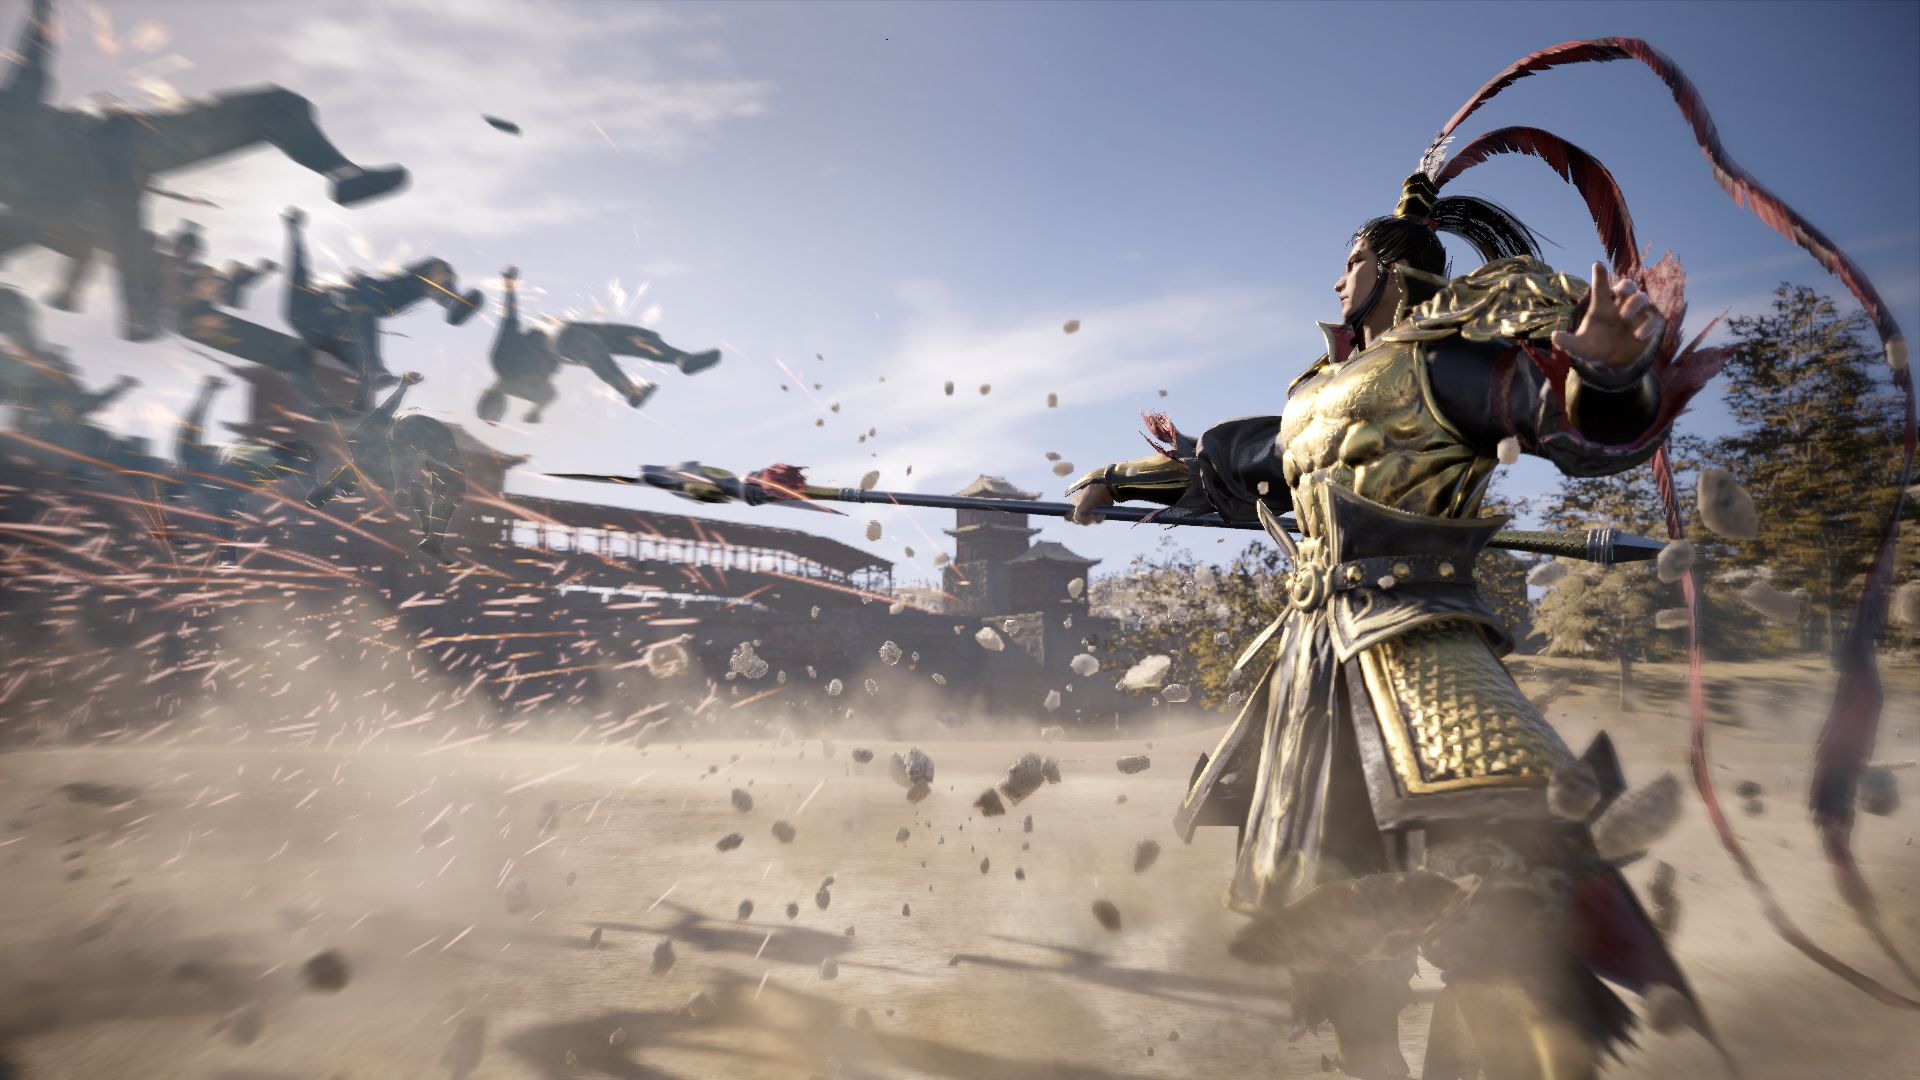 The ESRB Details Content Of Dynasty Warriors 9